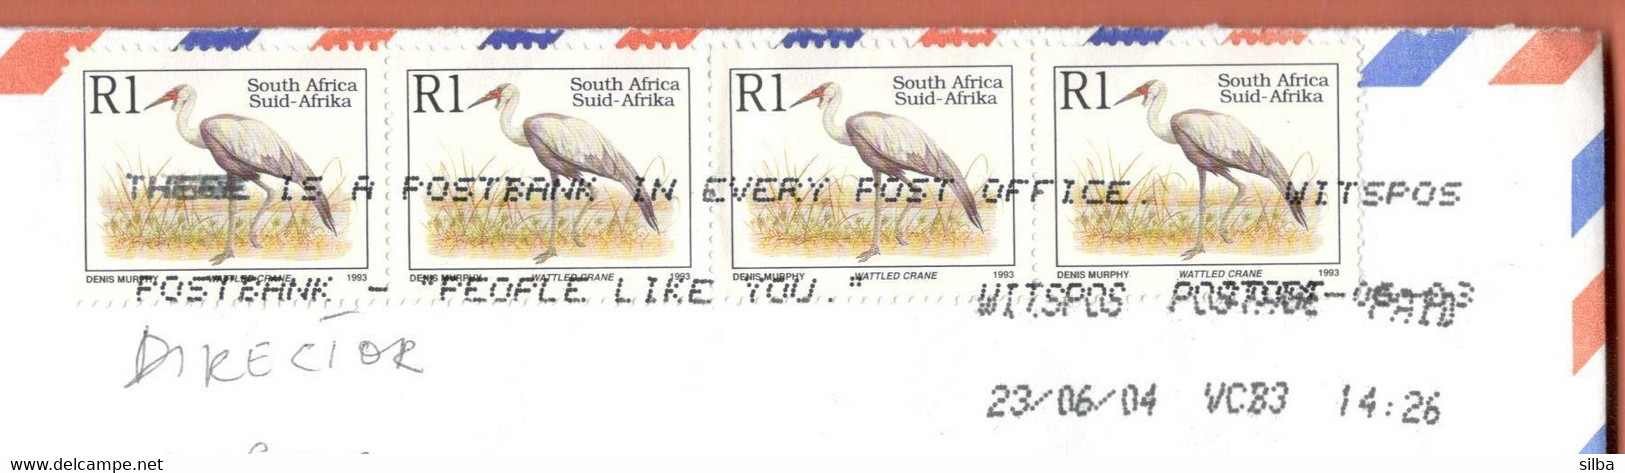 South Africa Witspos 2004 / There Is A Postbank In Every Post Office / Machine Stamp Slogan / Bird Wattled Crane 1993 - Covers & Documents